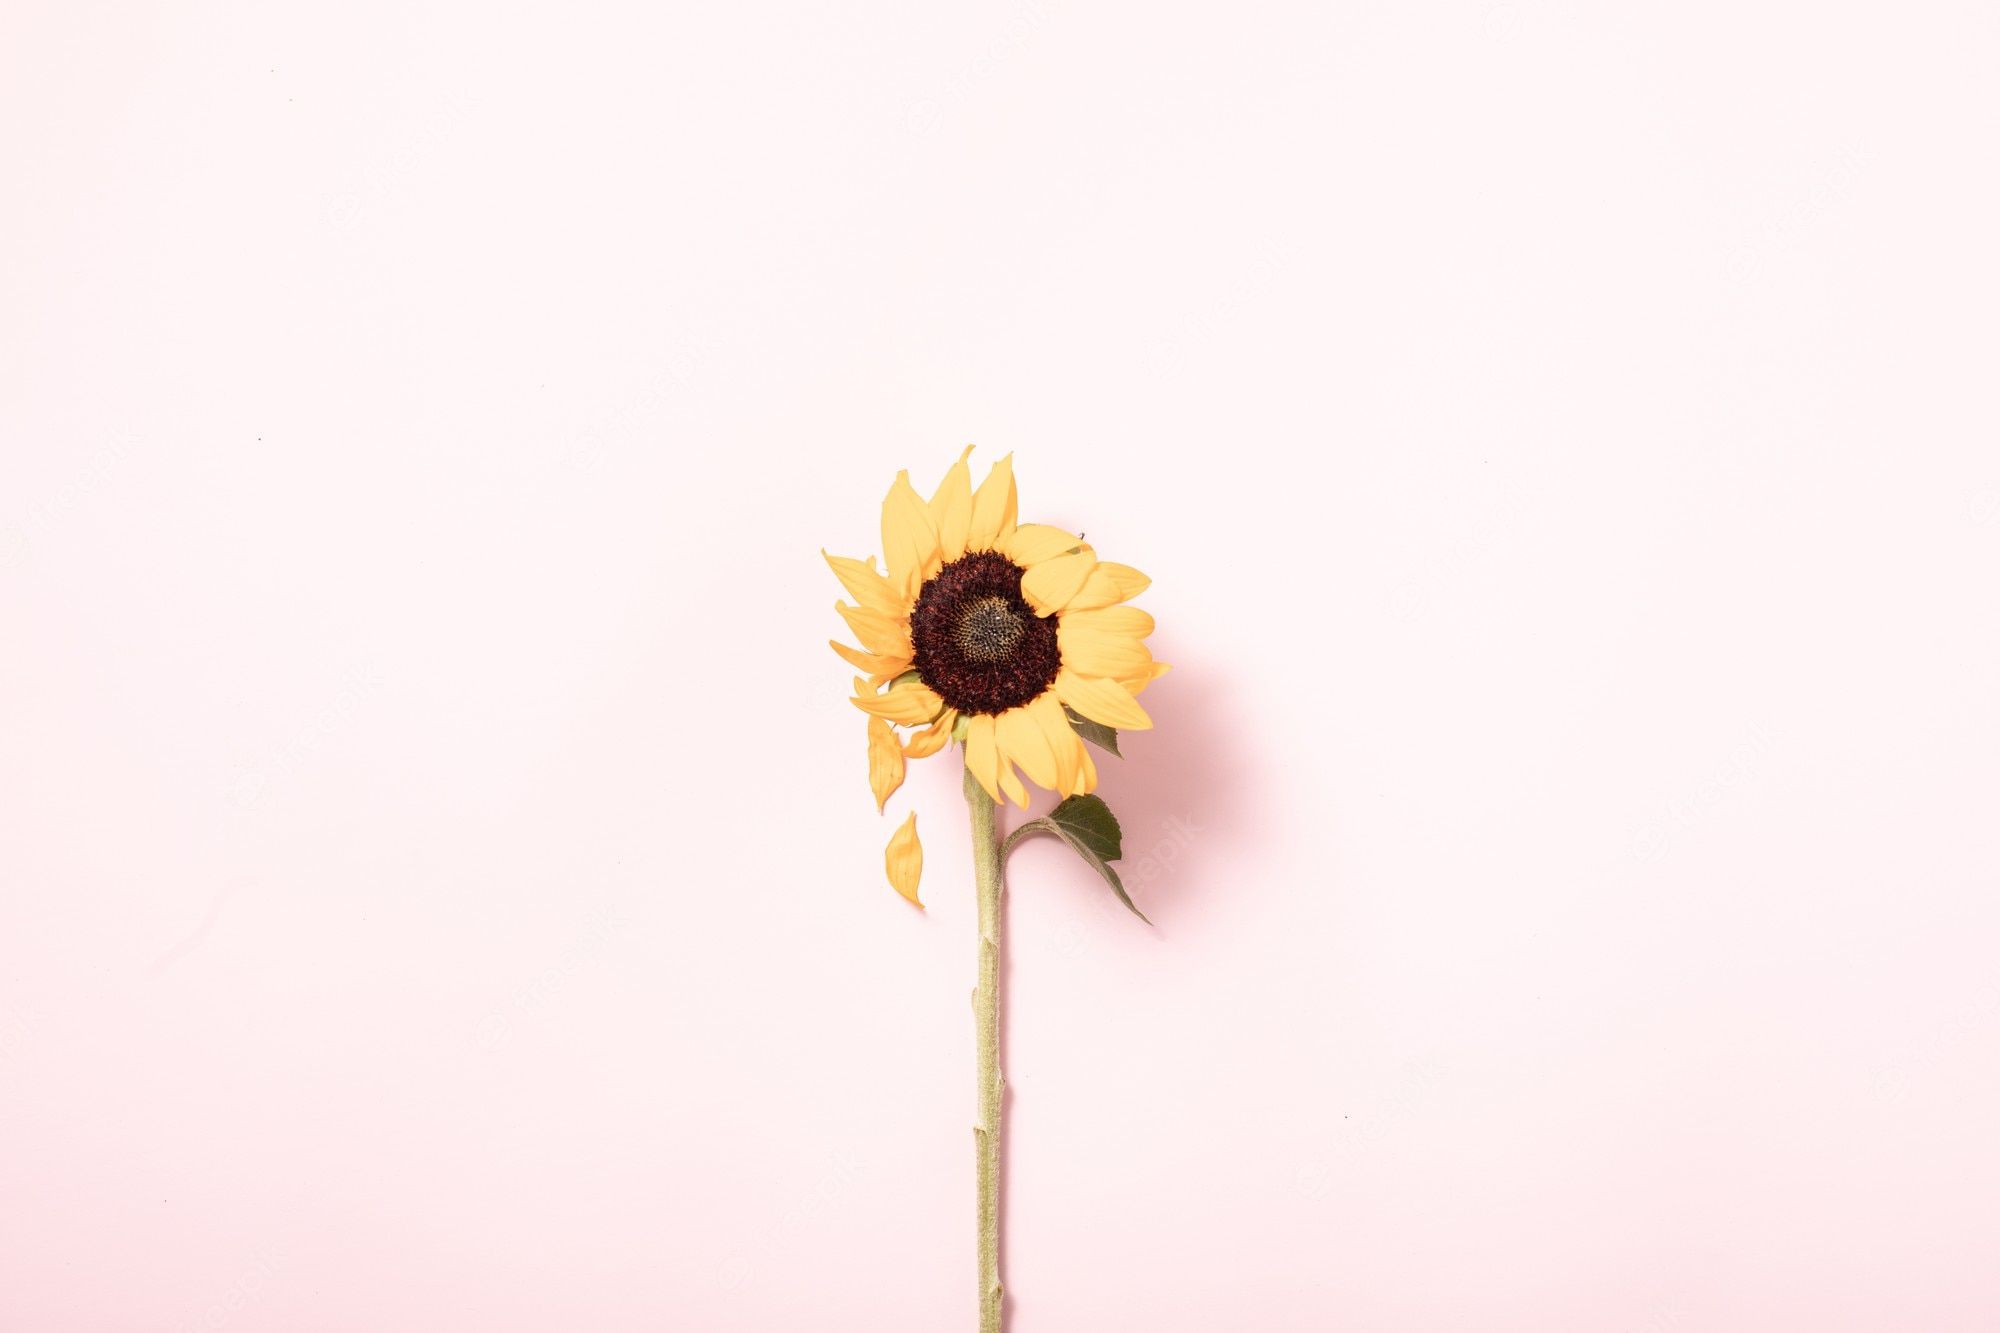 Premium Photo. Summer concept with sunflowers. border arrangement background. flatlay, top view. yellow flowers on pink background, flat lay